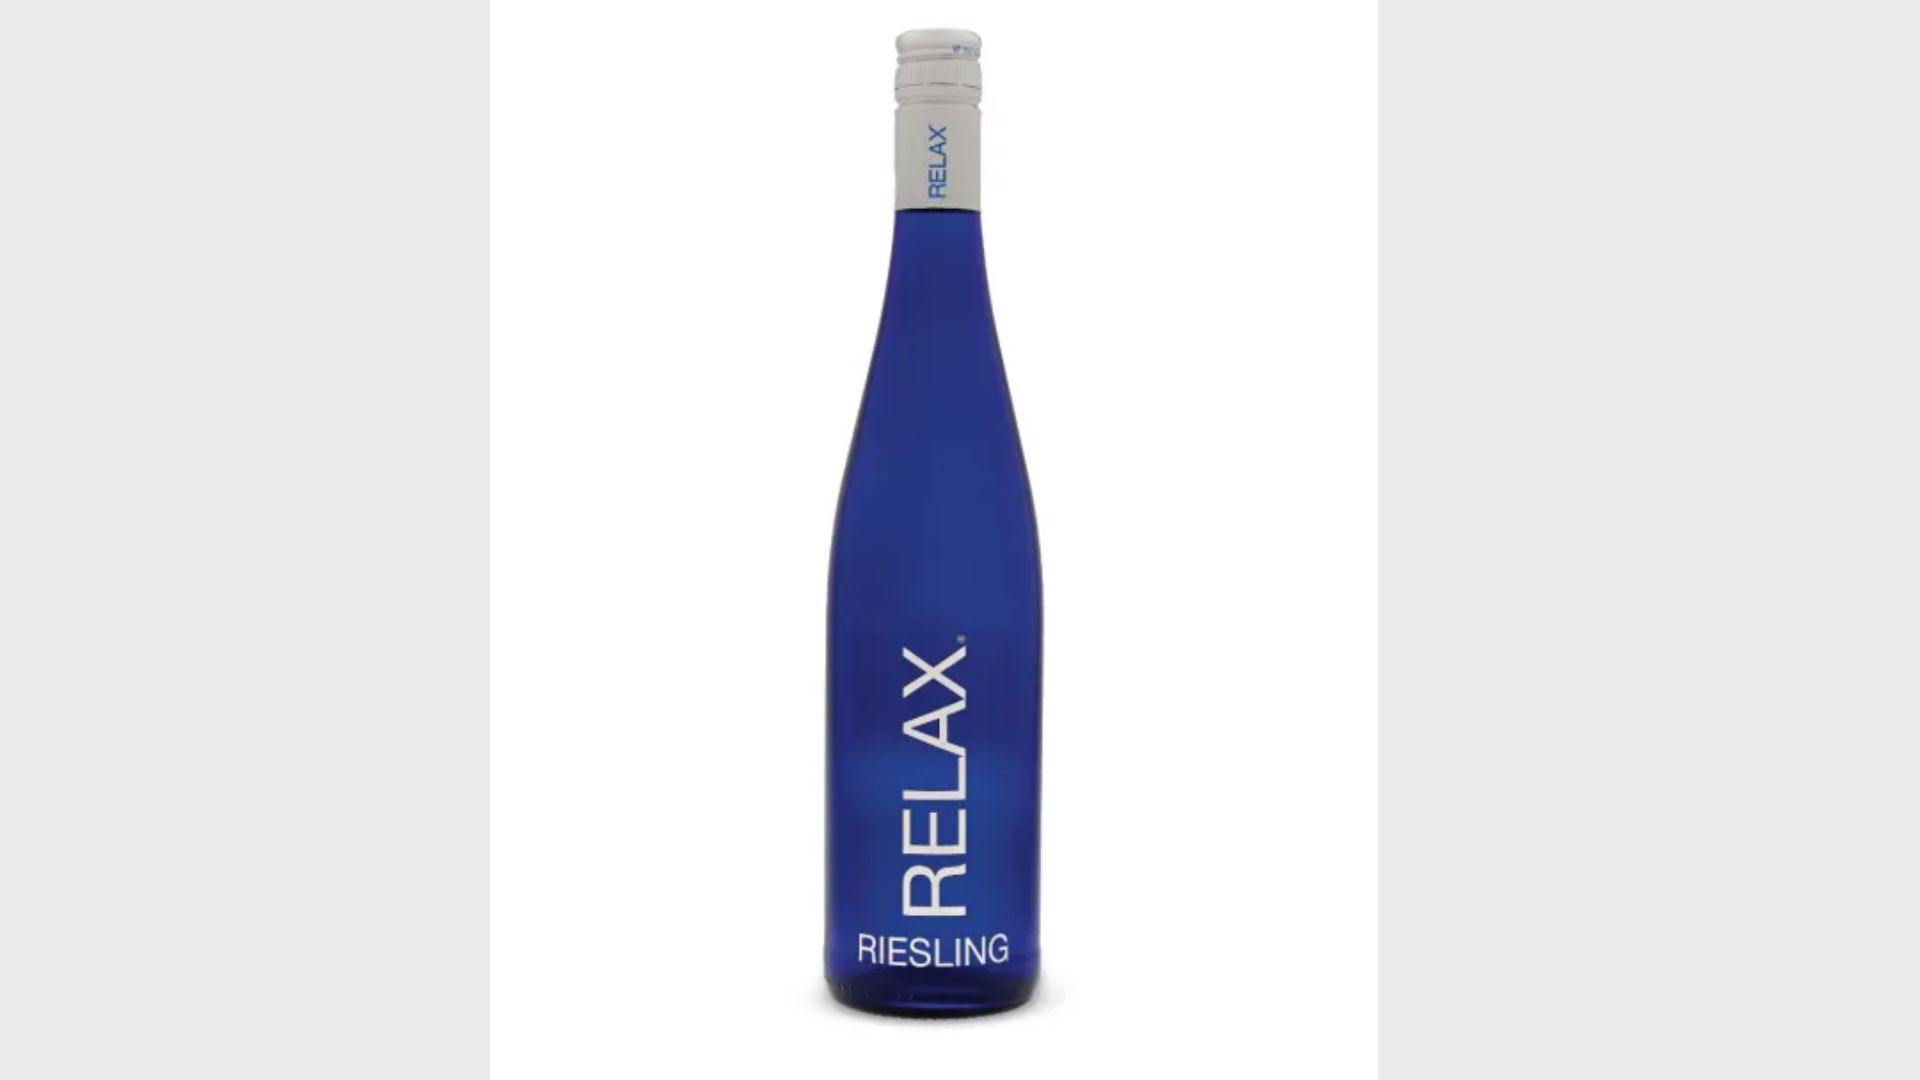 Relax Riesling wine